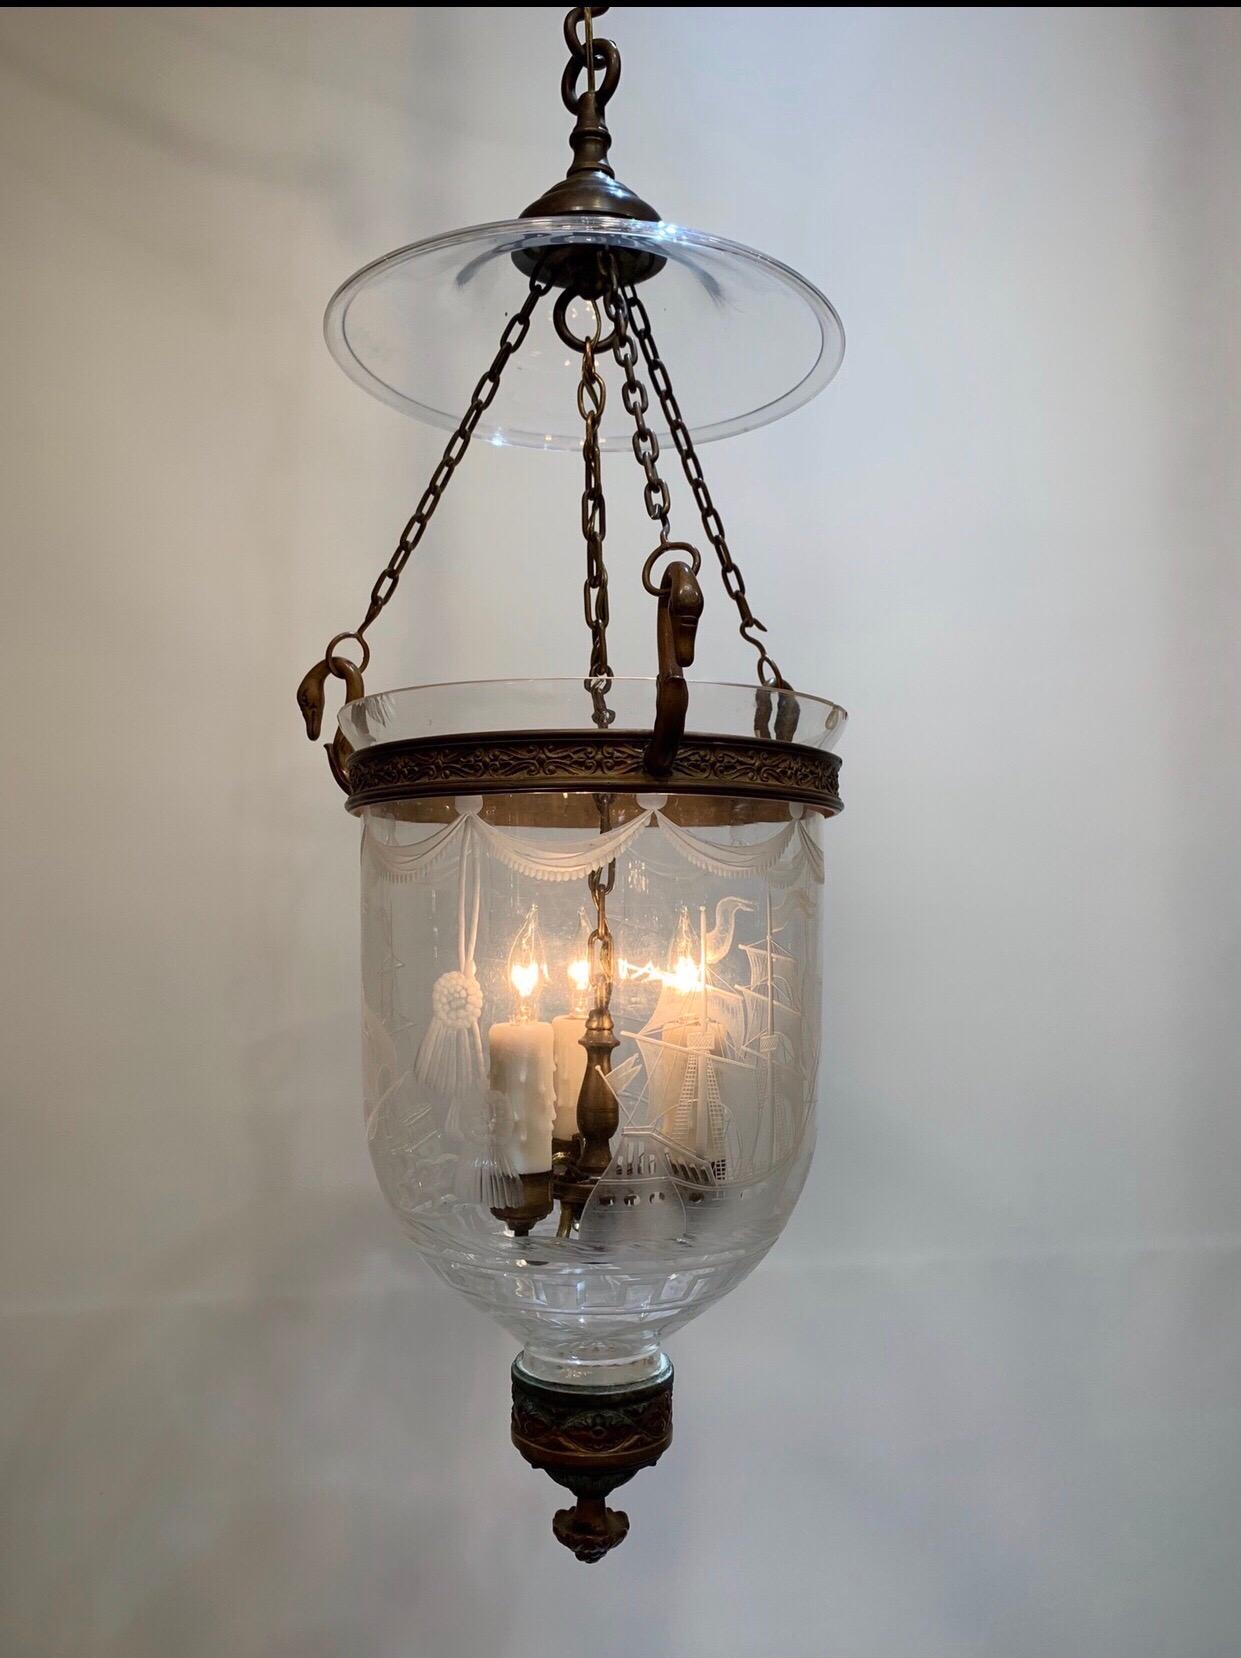 Rare 19th century American etched bell jar lantern with ships. This Classic Federal bell jar has an etched theatrical drape border around the top with double tassels hanging between the full-rigged brig ship floating on ocean waves above a Greek key